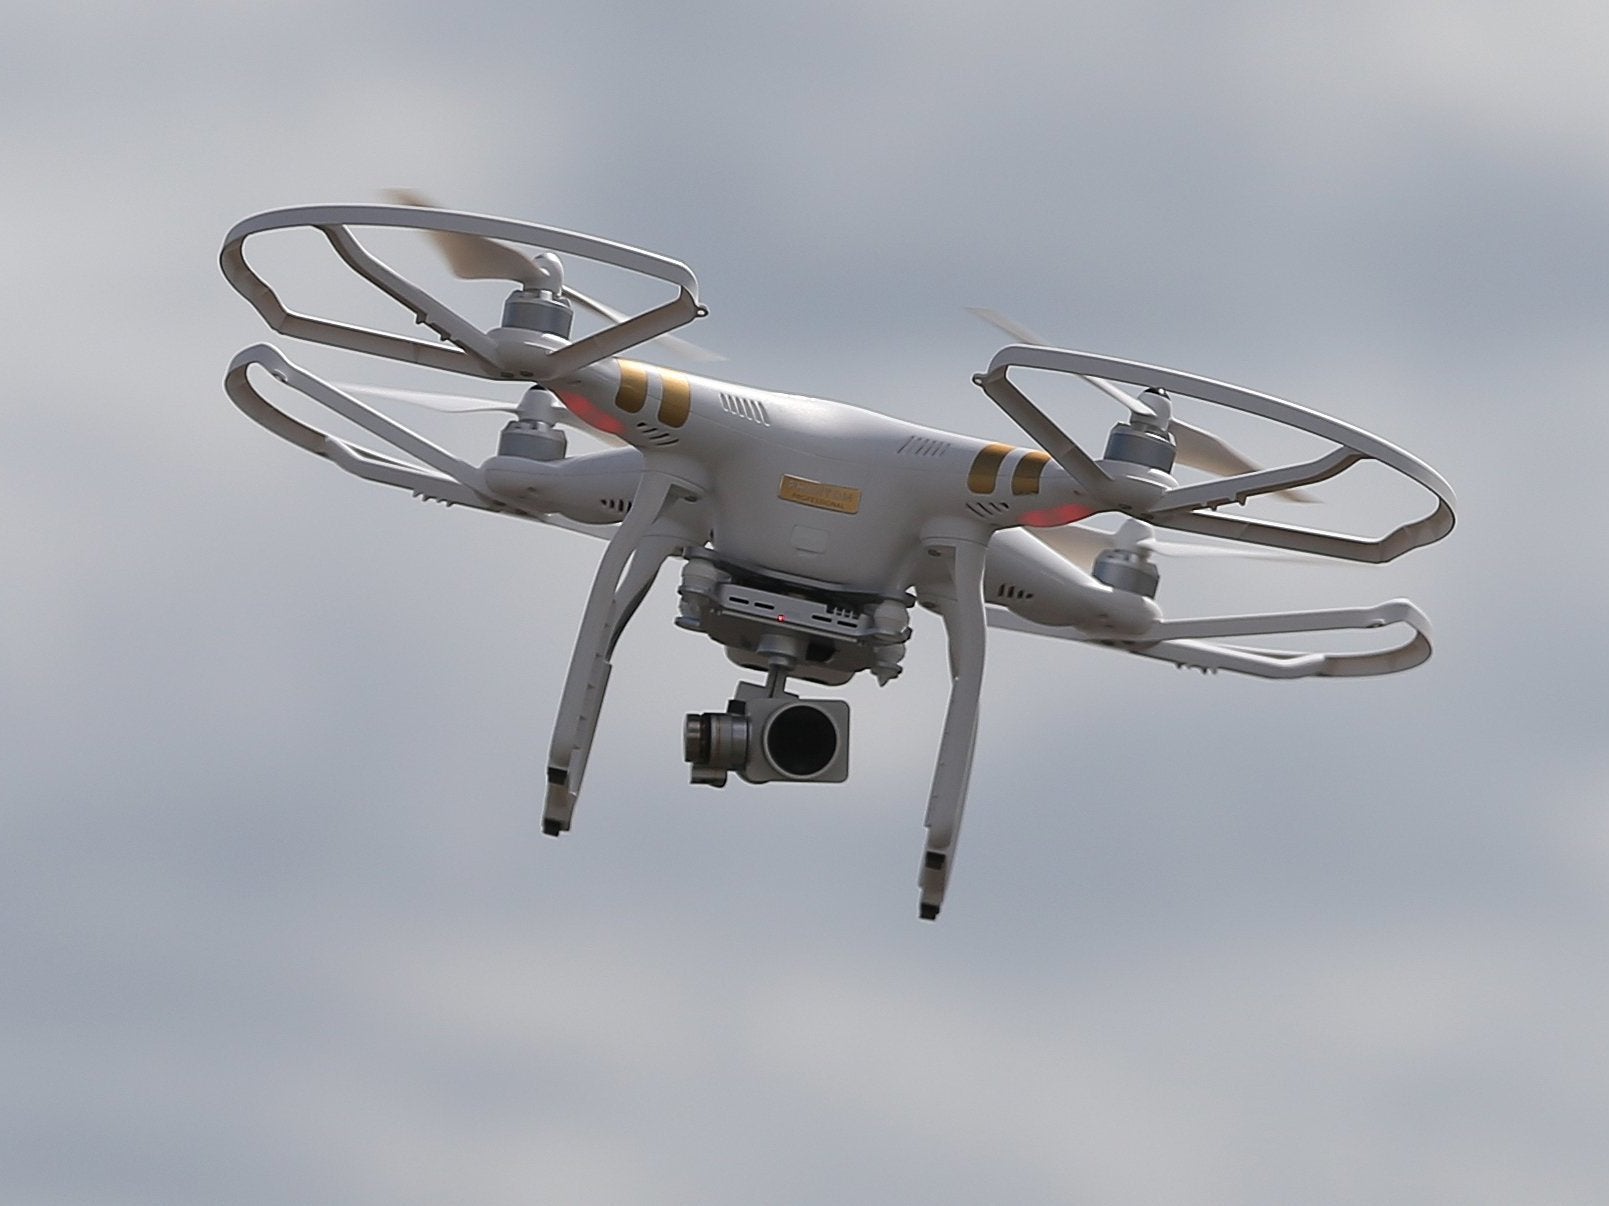 Drone operators will have to pay annual charge under new registration scheme